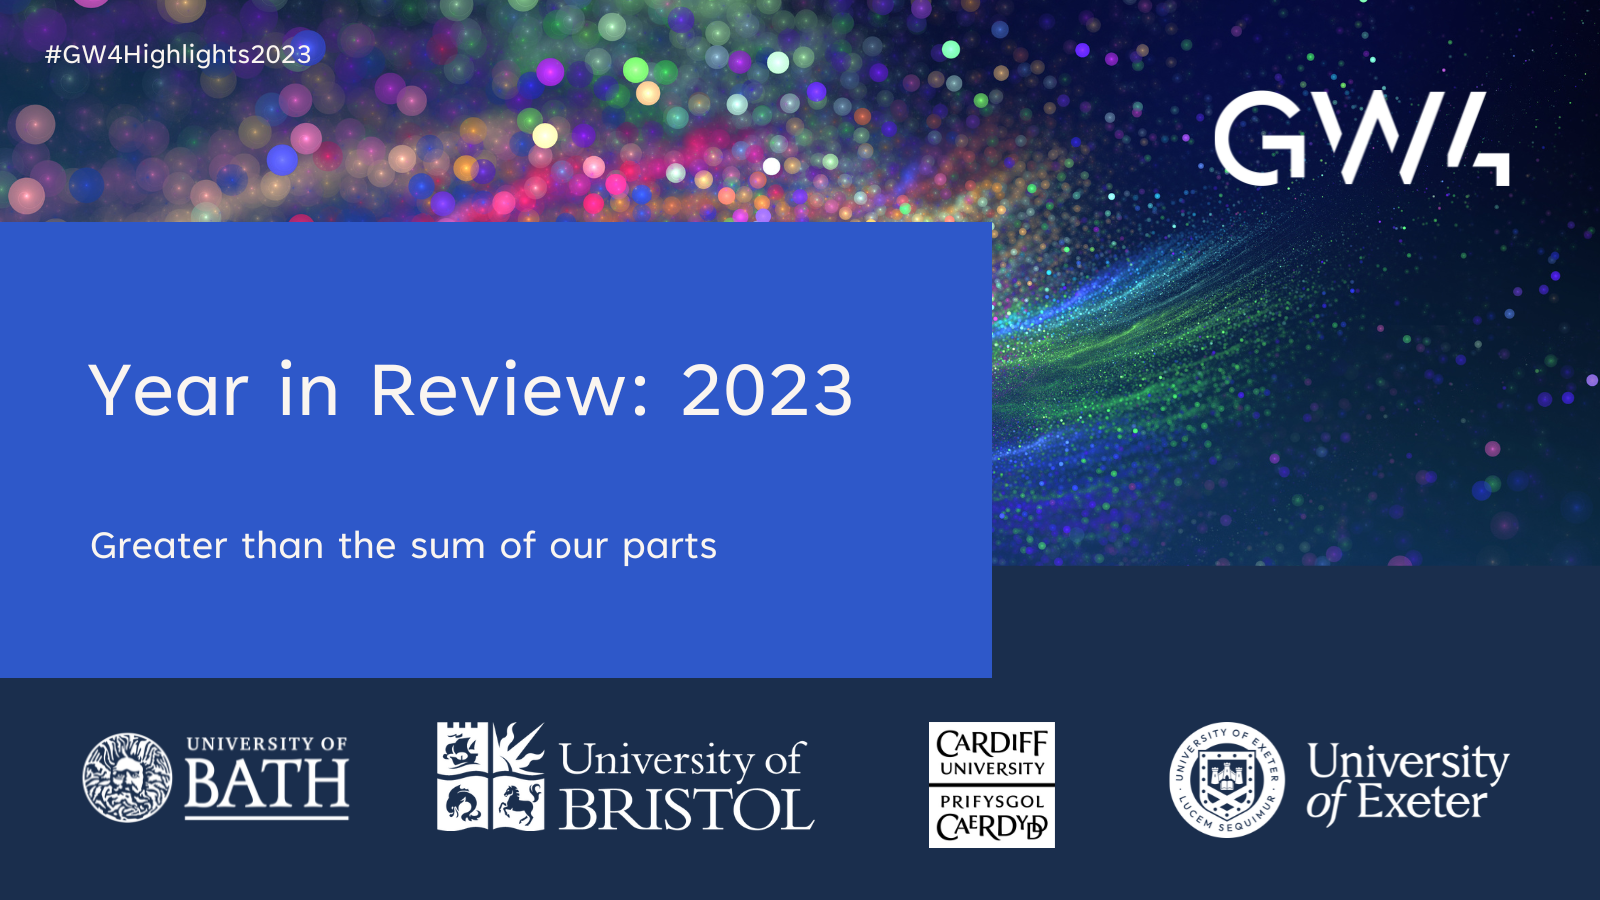 Image depicts GW4 logo, alongside the logos of Bath, Bristol, Cardiff & Exeter universities. It says 'GW4 Year in Review 2023', and is set against a sparkly background.